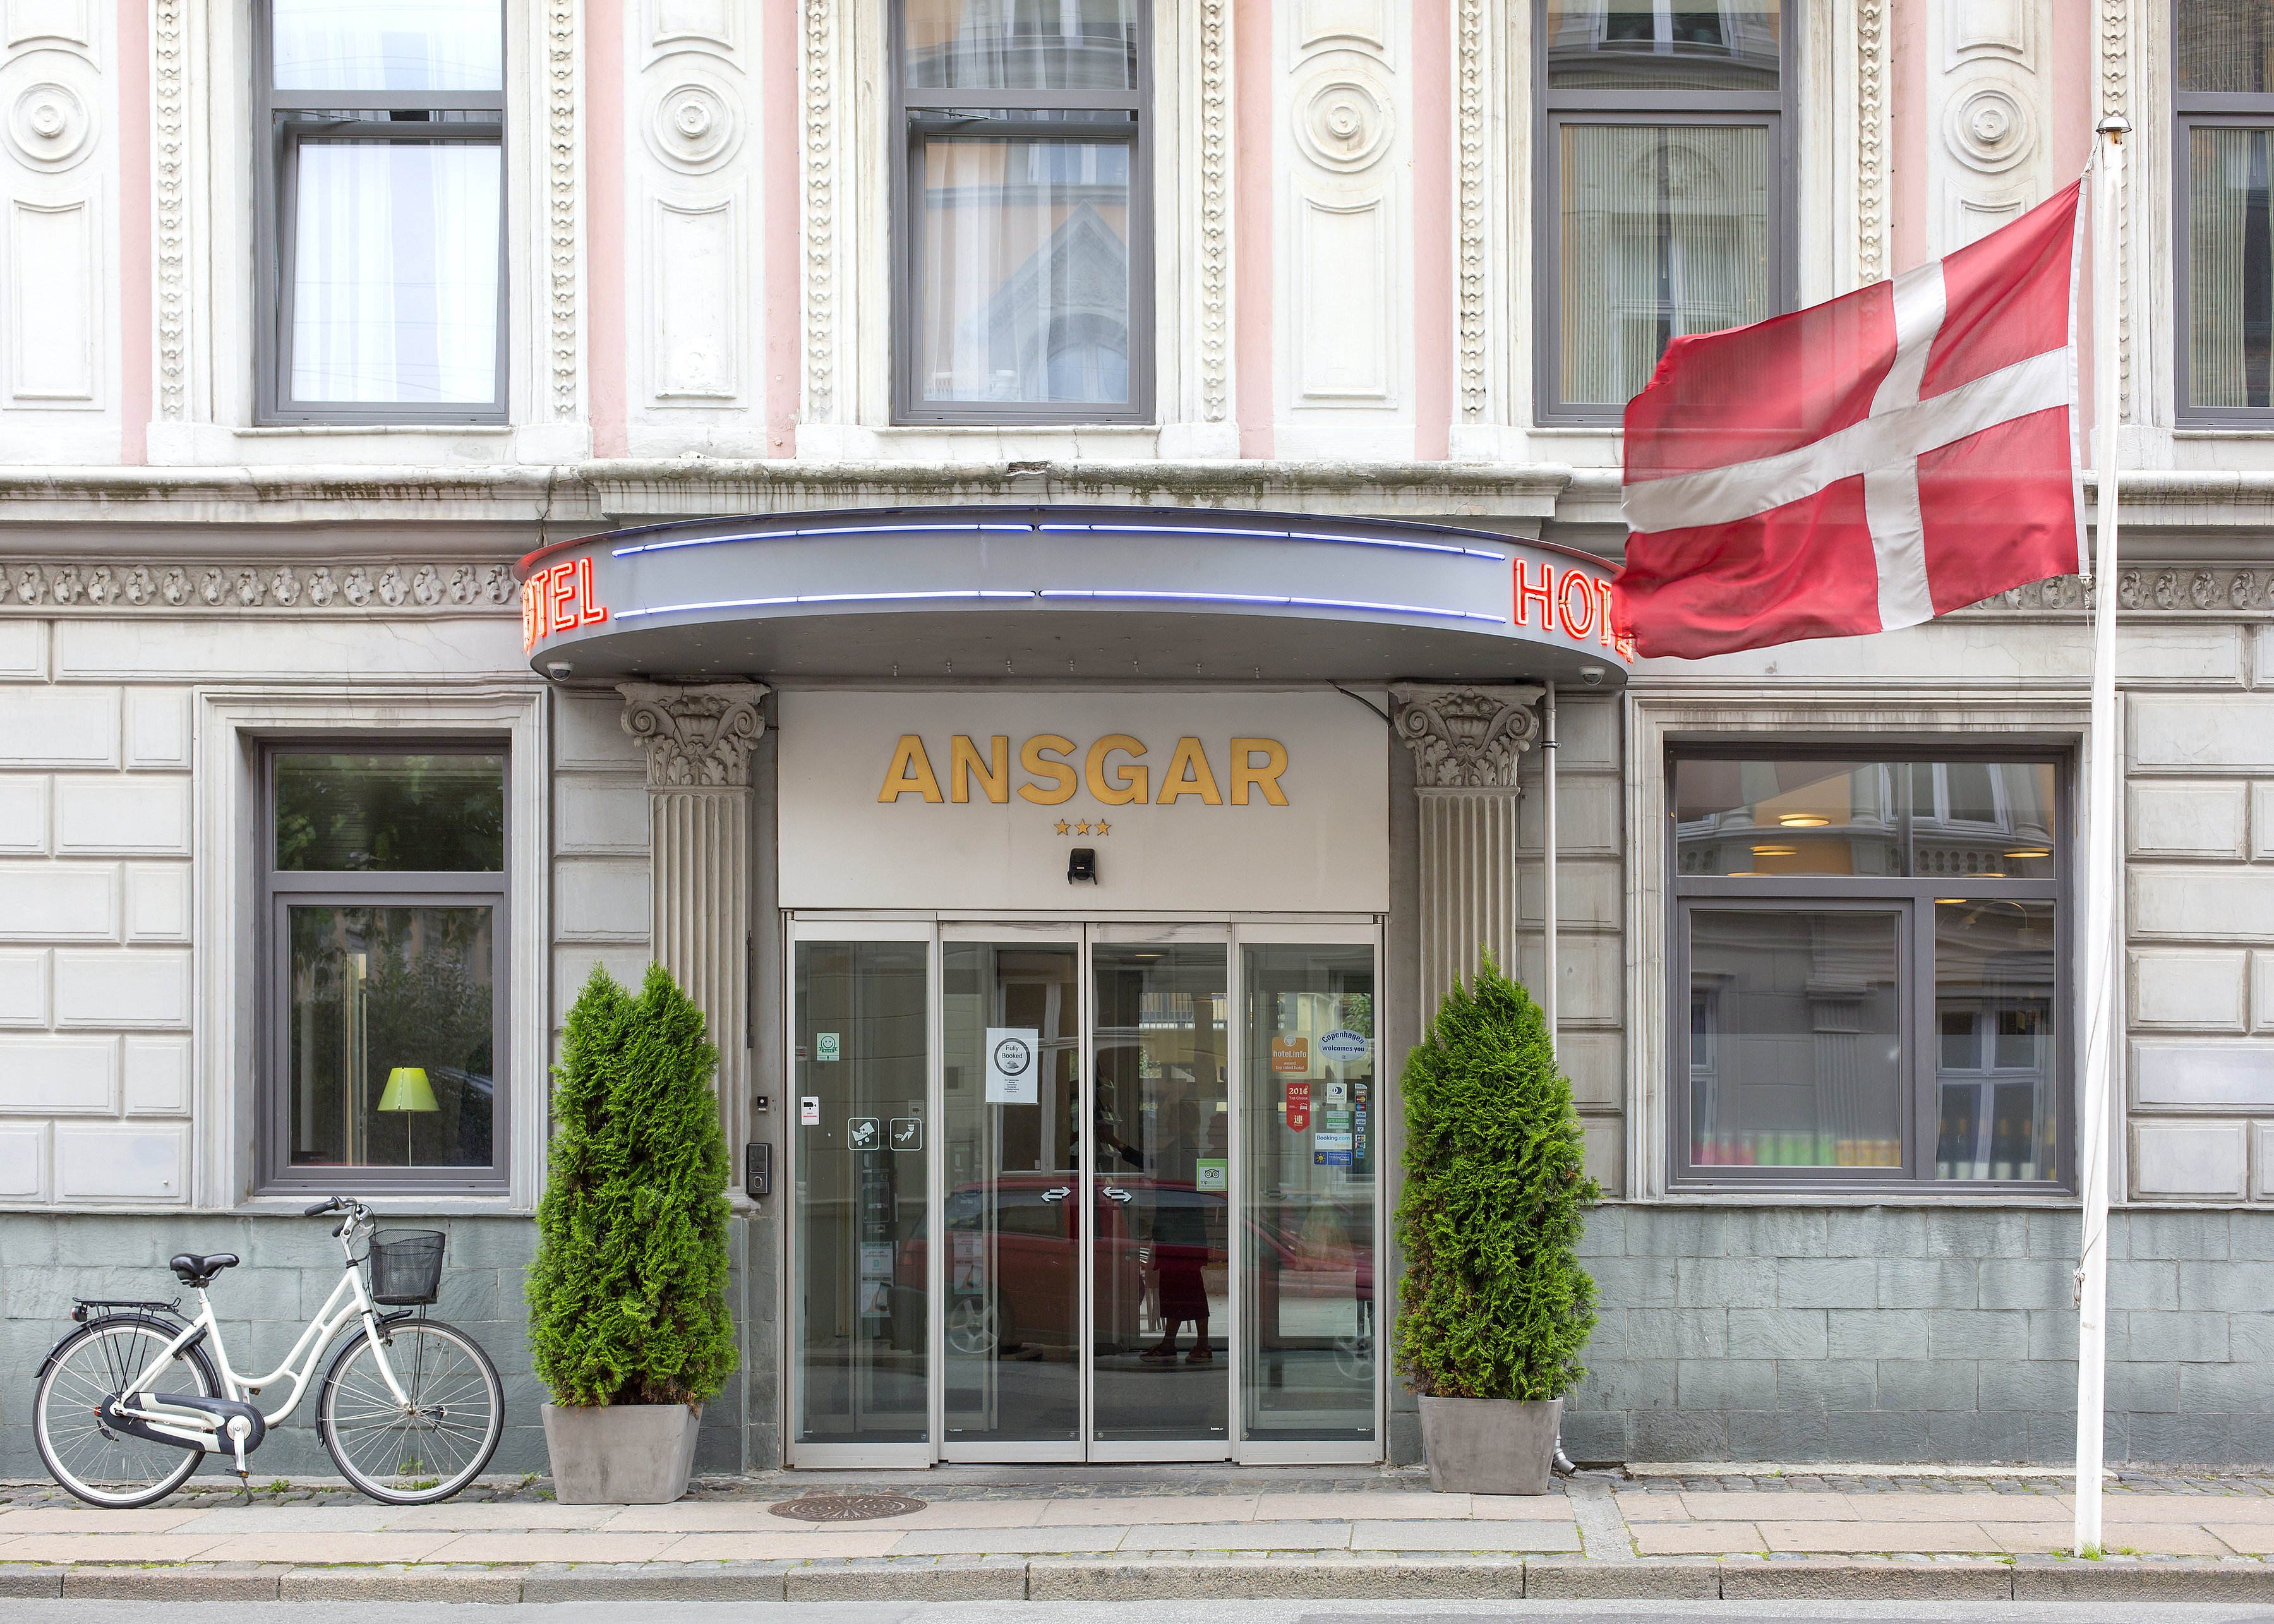 Hotel Ansgar <br/>90.77 ew <br/> <a href='http://vakantieoplossing.nl/outpage/?id=42d7705aa54f3704639a5ceada579acc' target='_blank'>View Details</a>